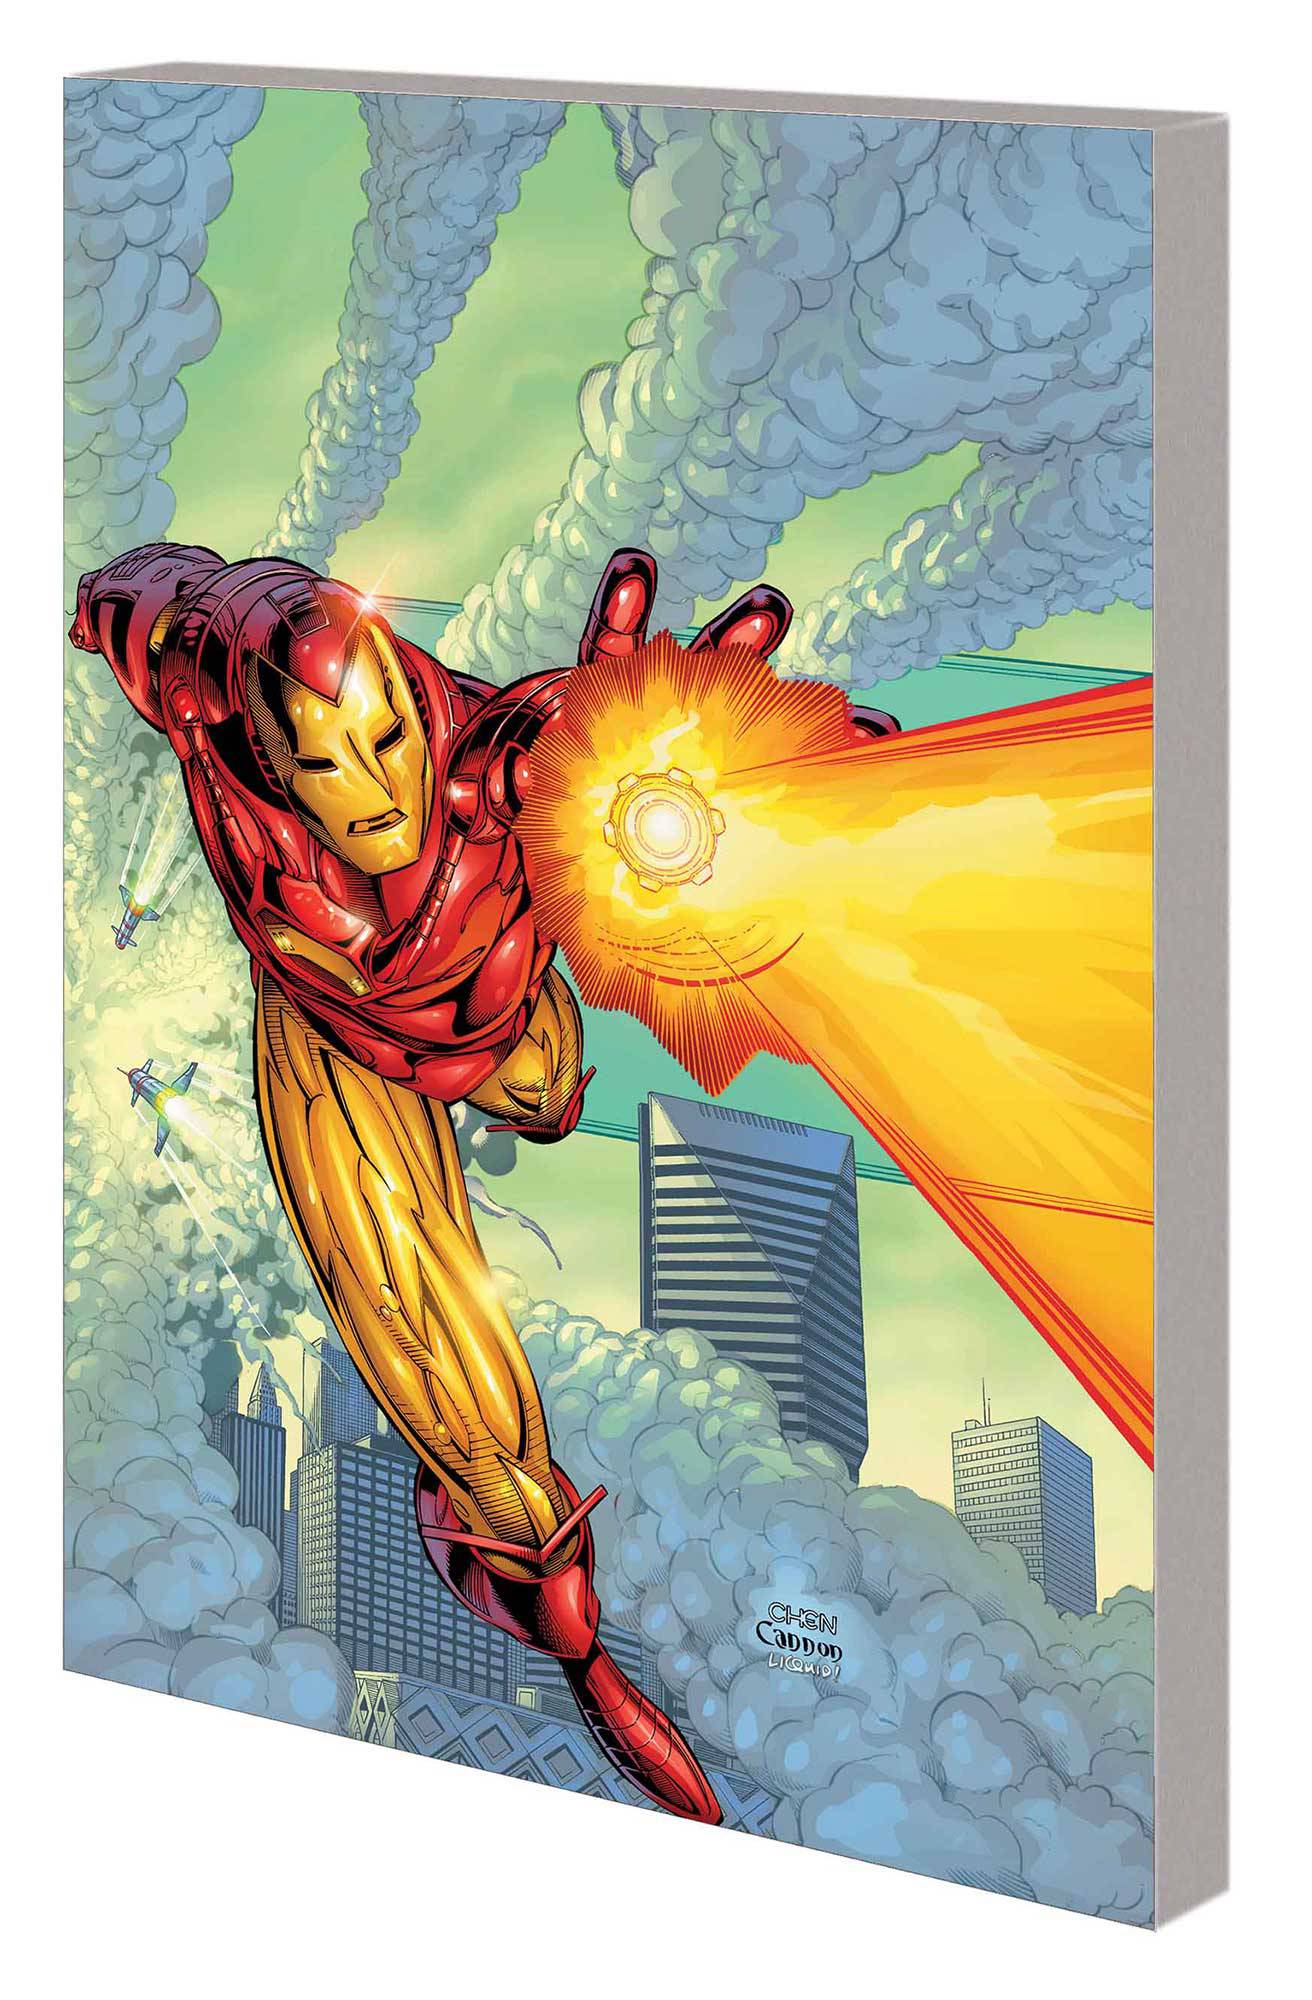 IRON MAN HEROES RETURN COMPLETE COLLECTION TP VOL 01